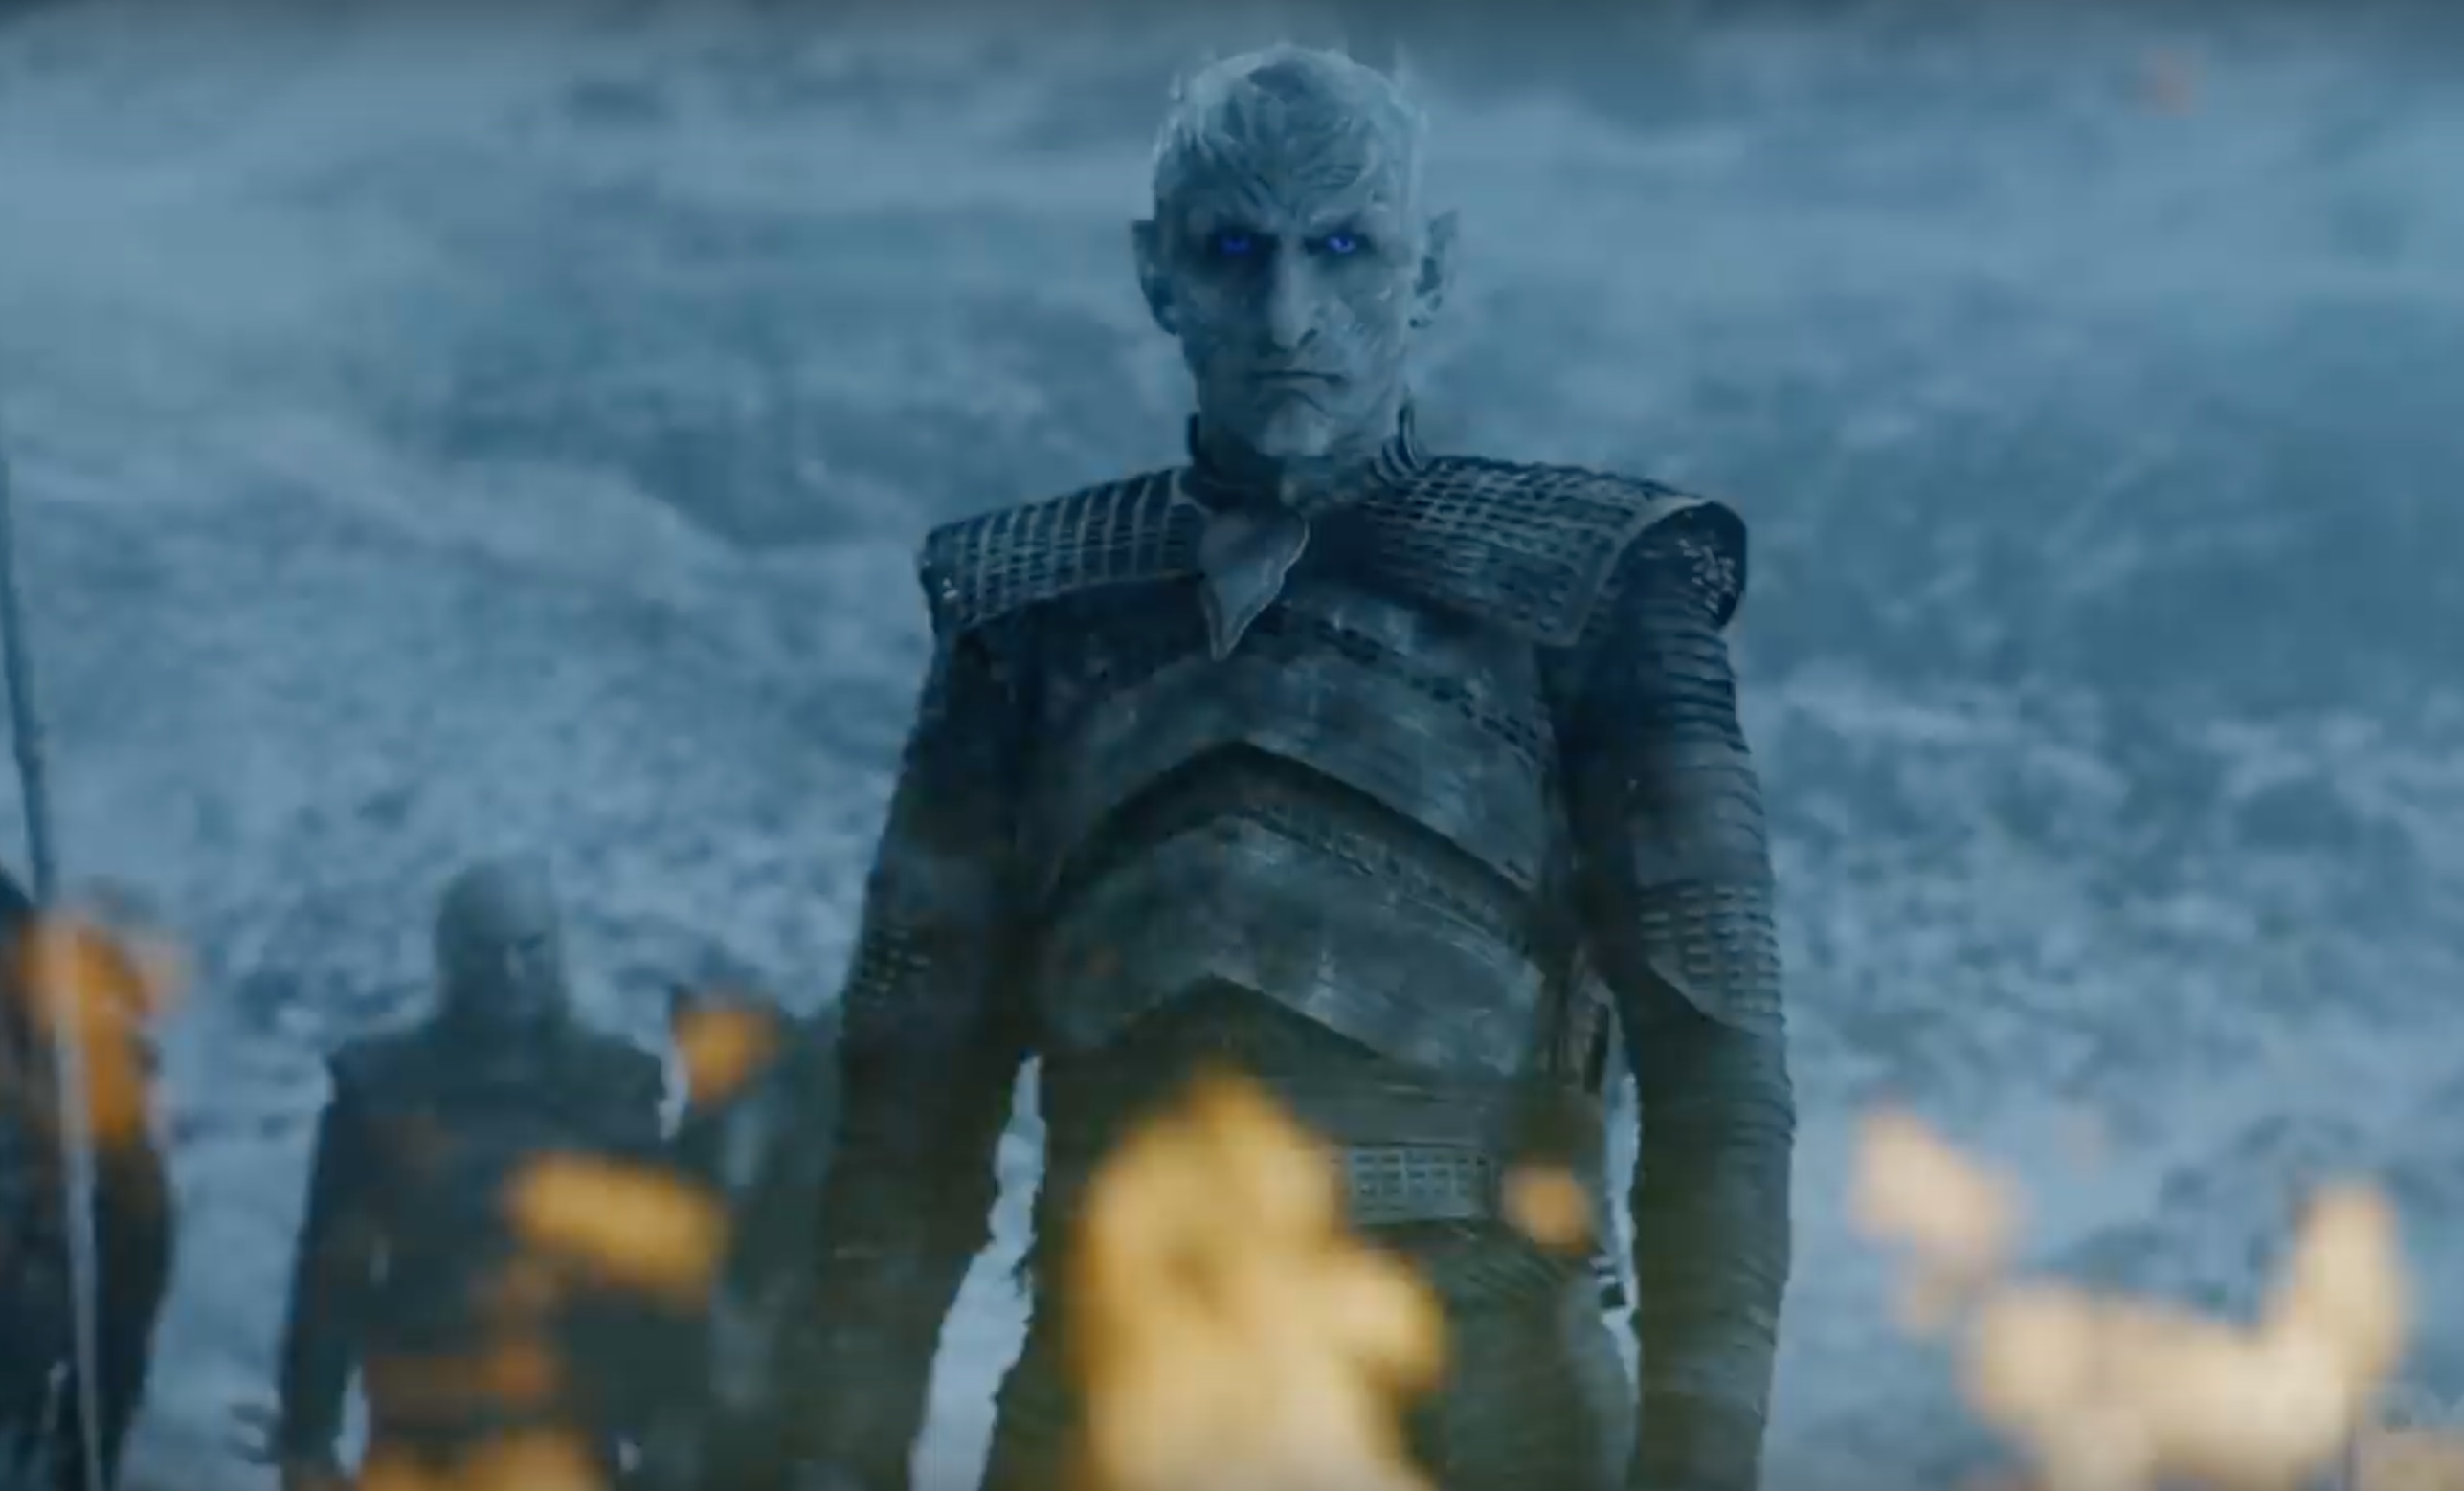 the Night King from Game of Thrones